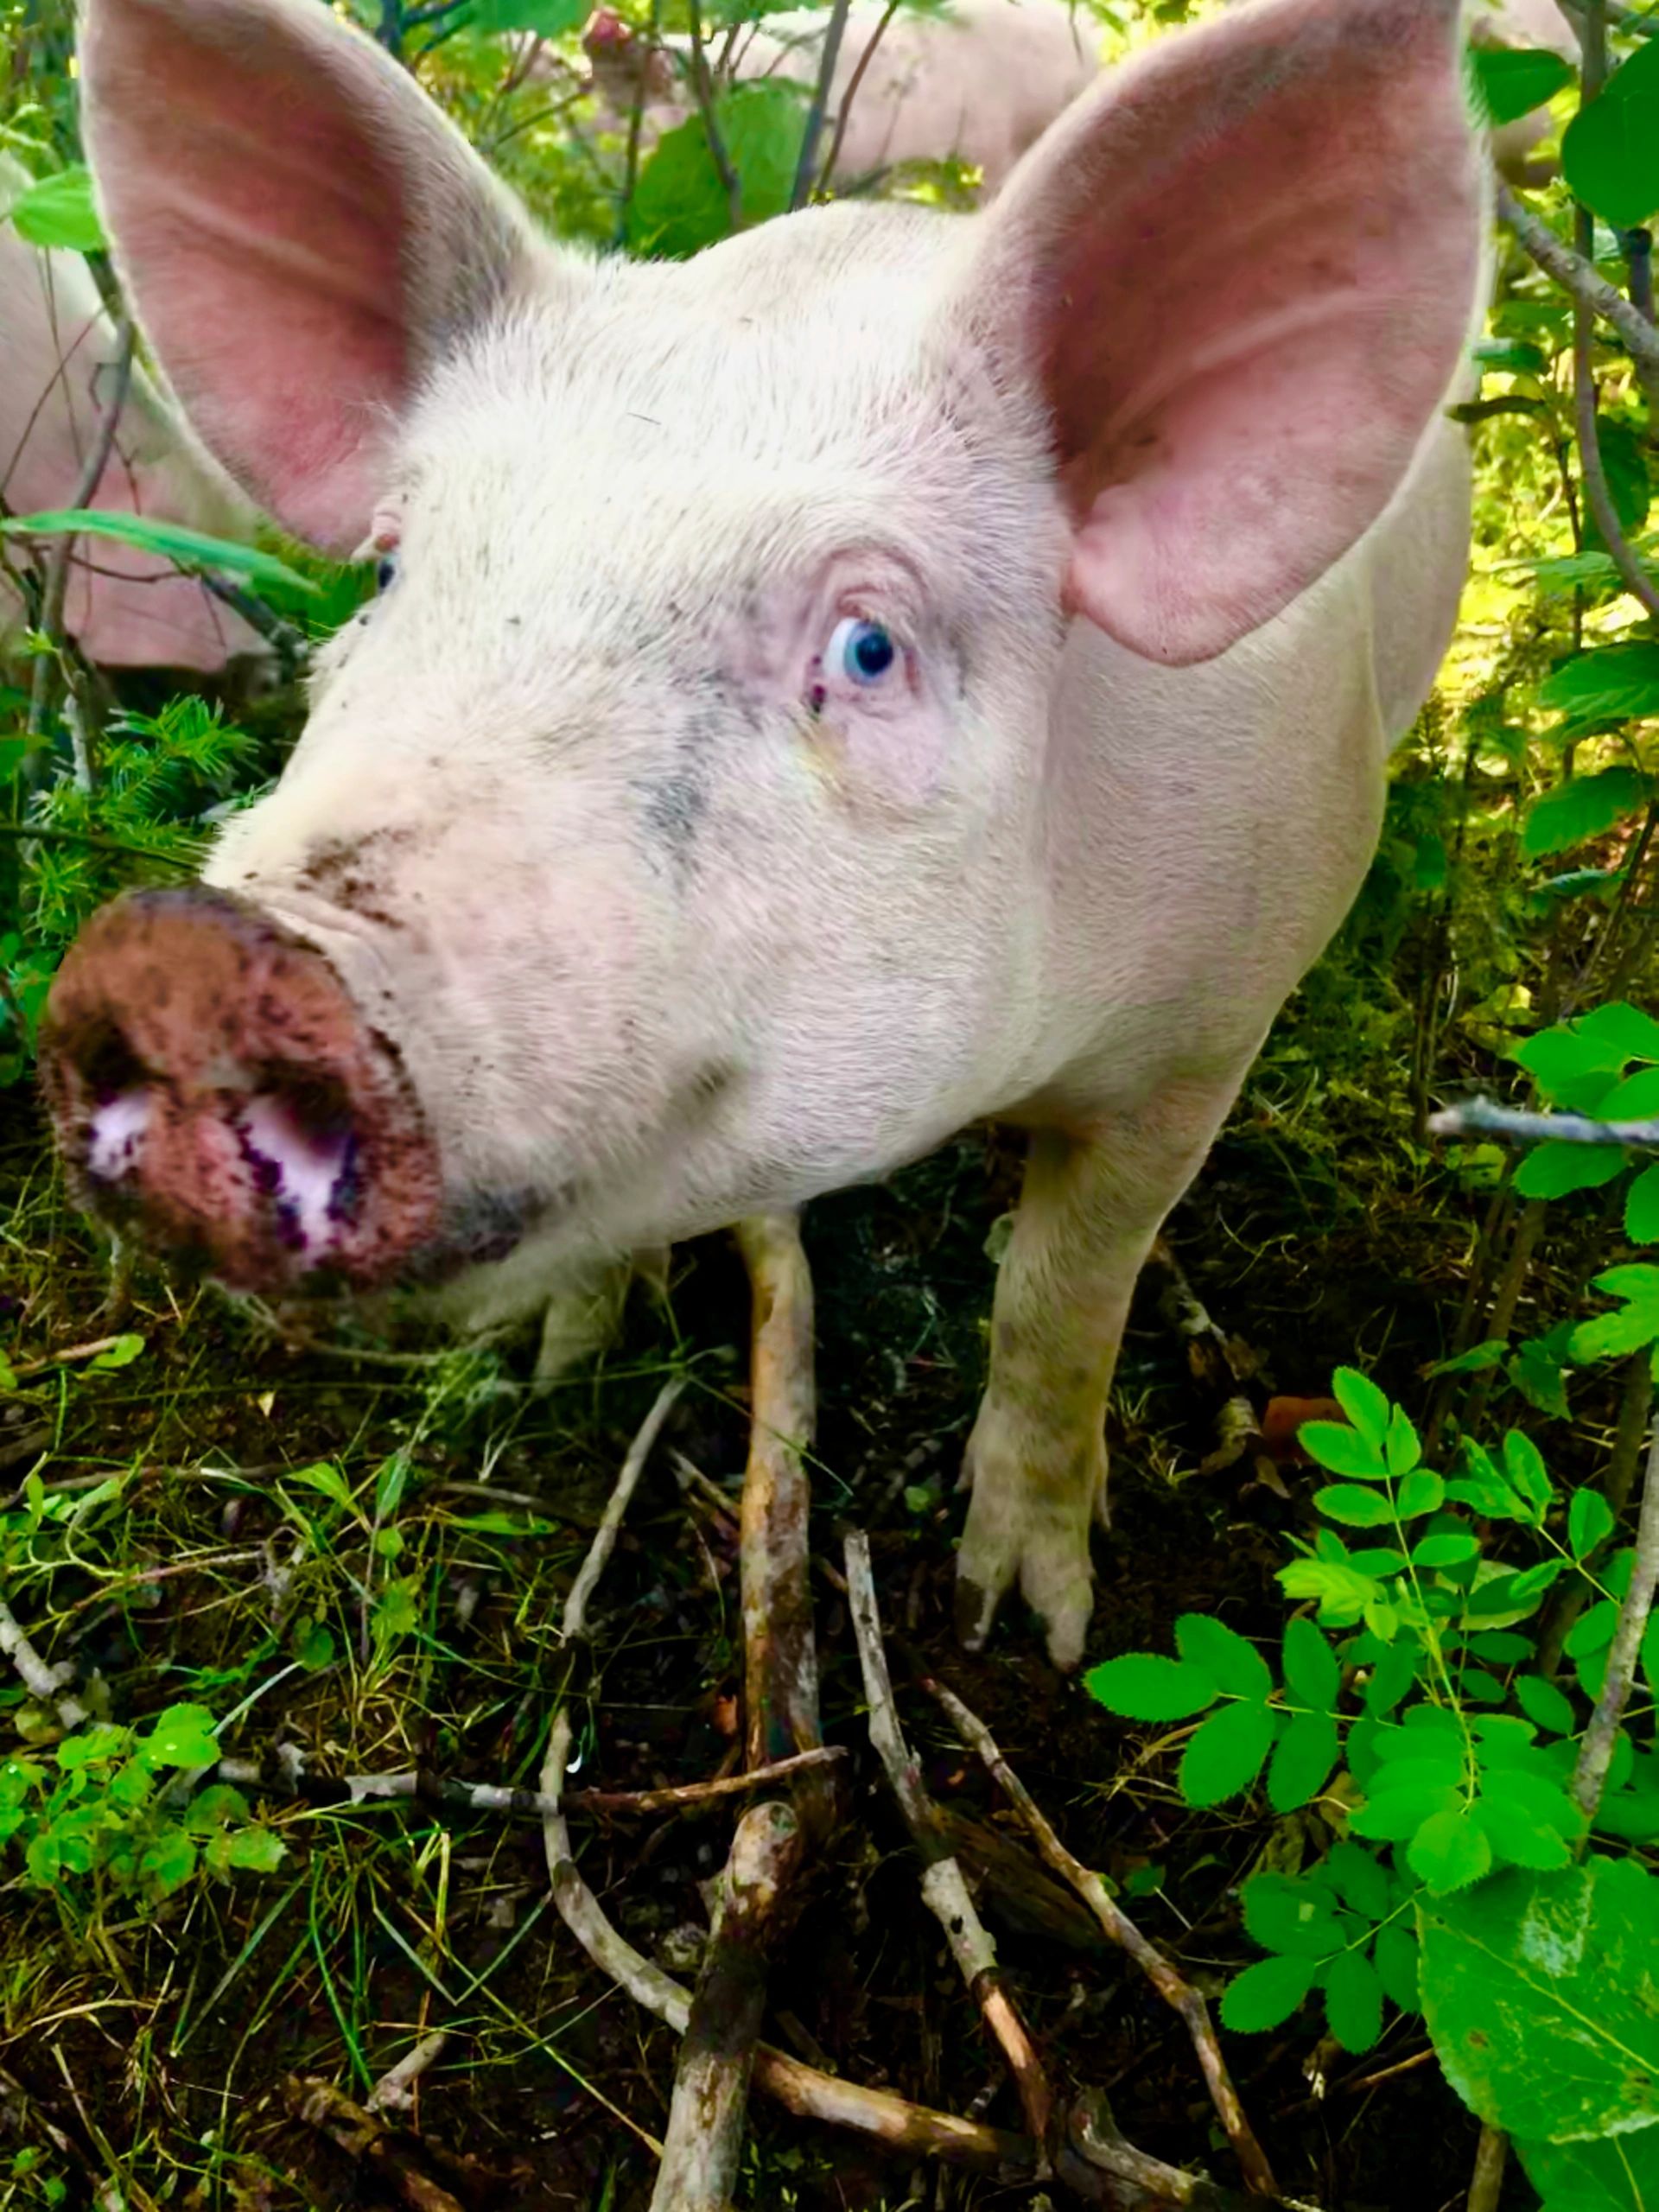 A forest raised pig amongst the foliage with a dirty snout from rooting around in the dirt.